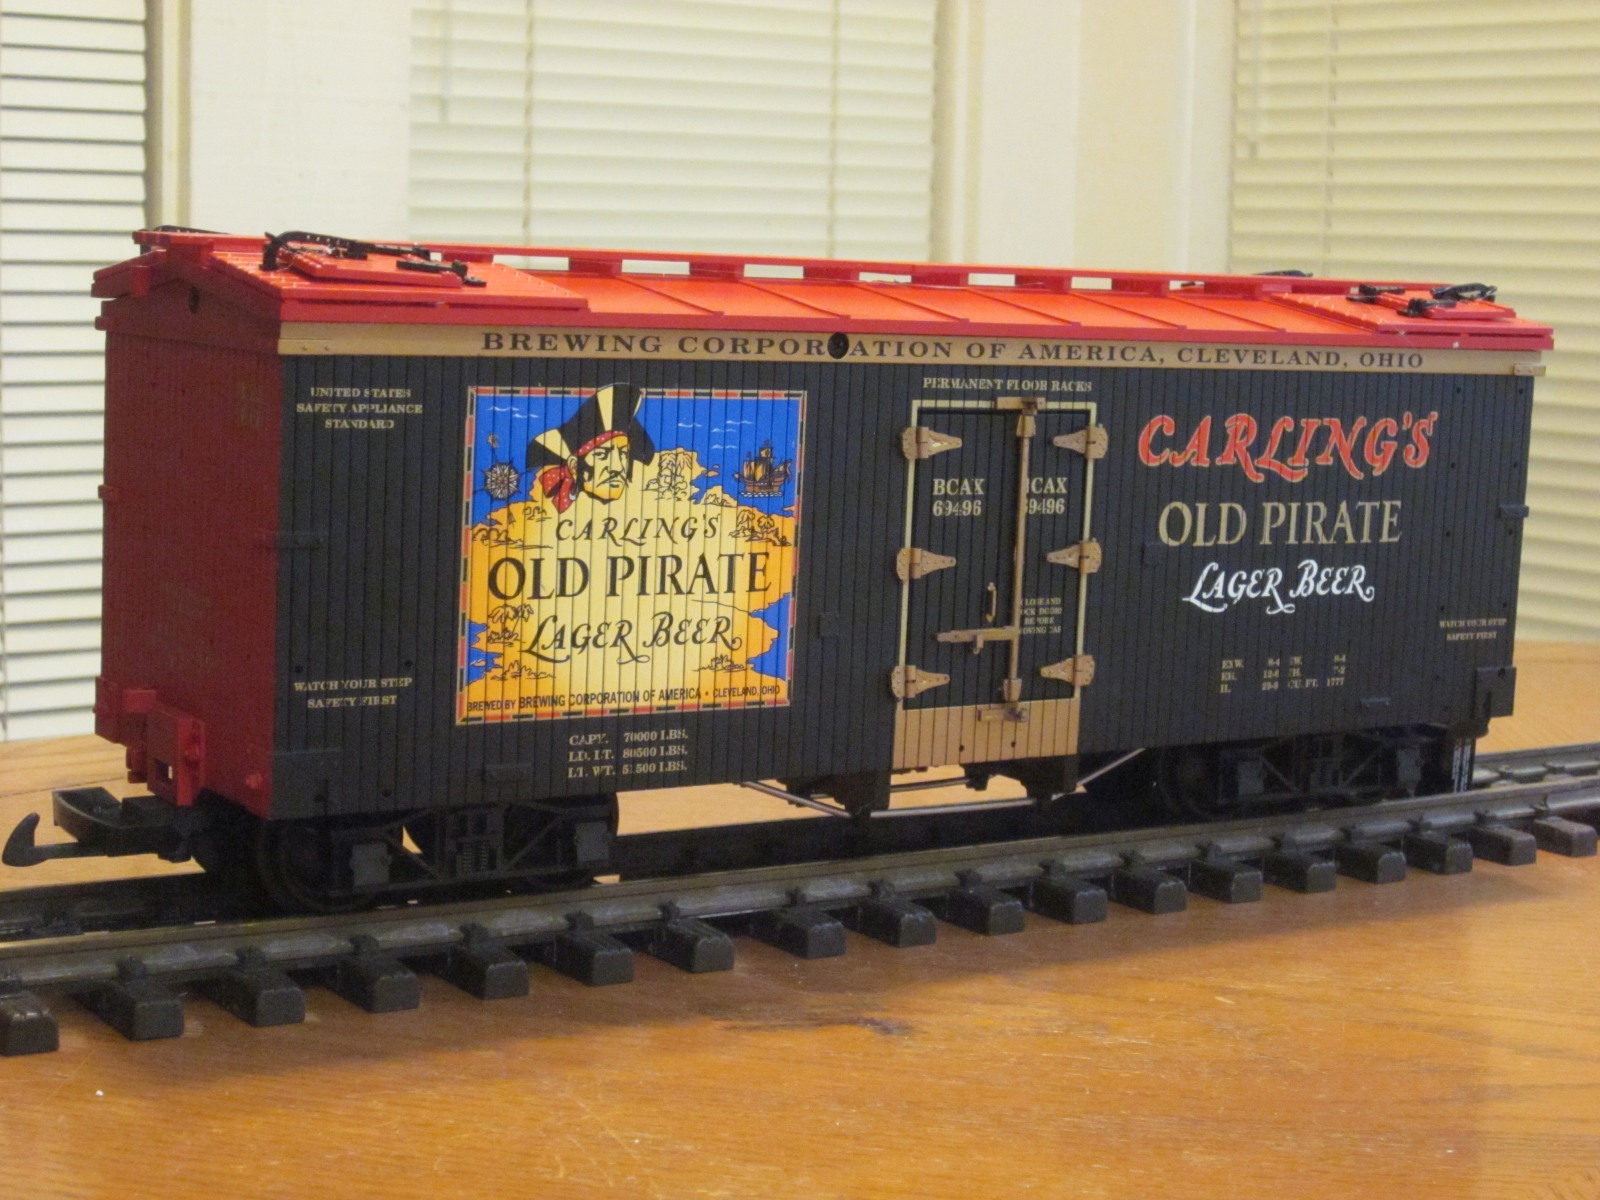 R16446 Carlings Old Pirate Lager Beer BCAX 69496